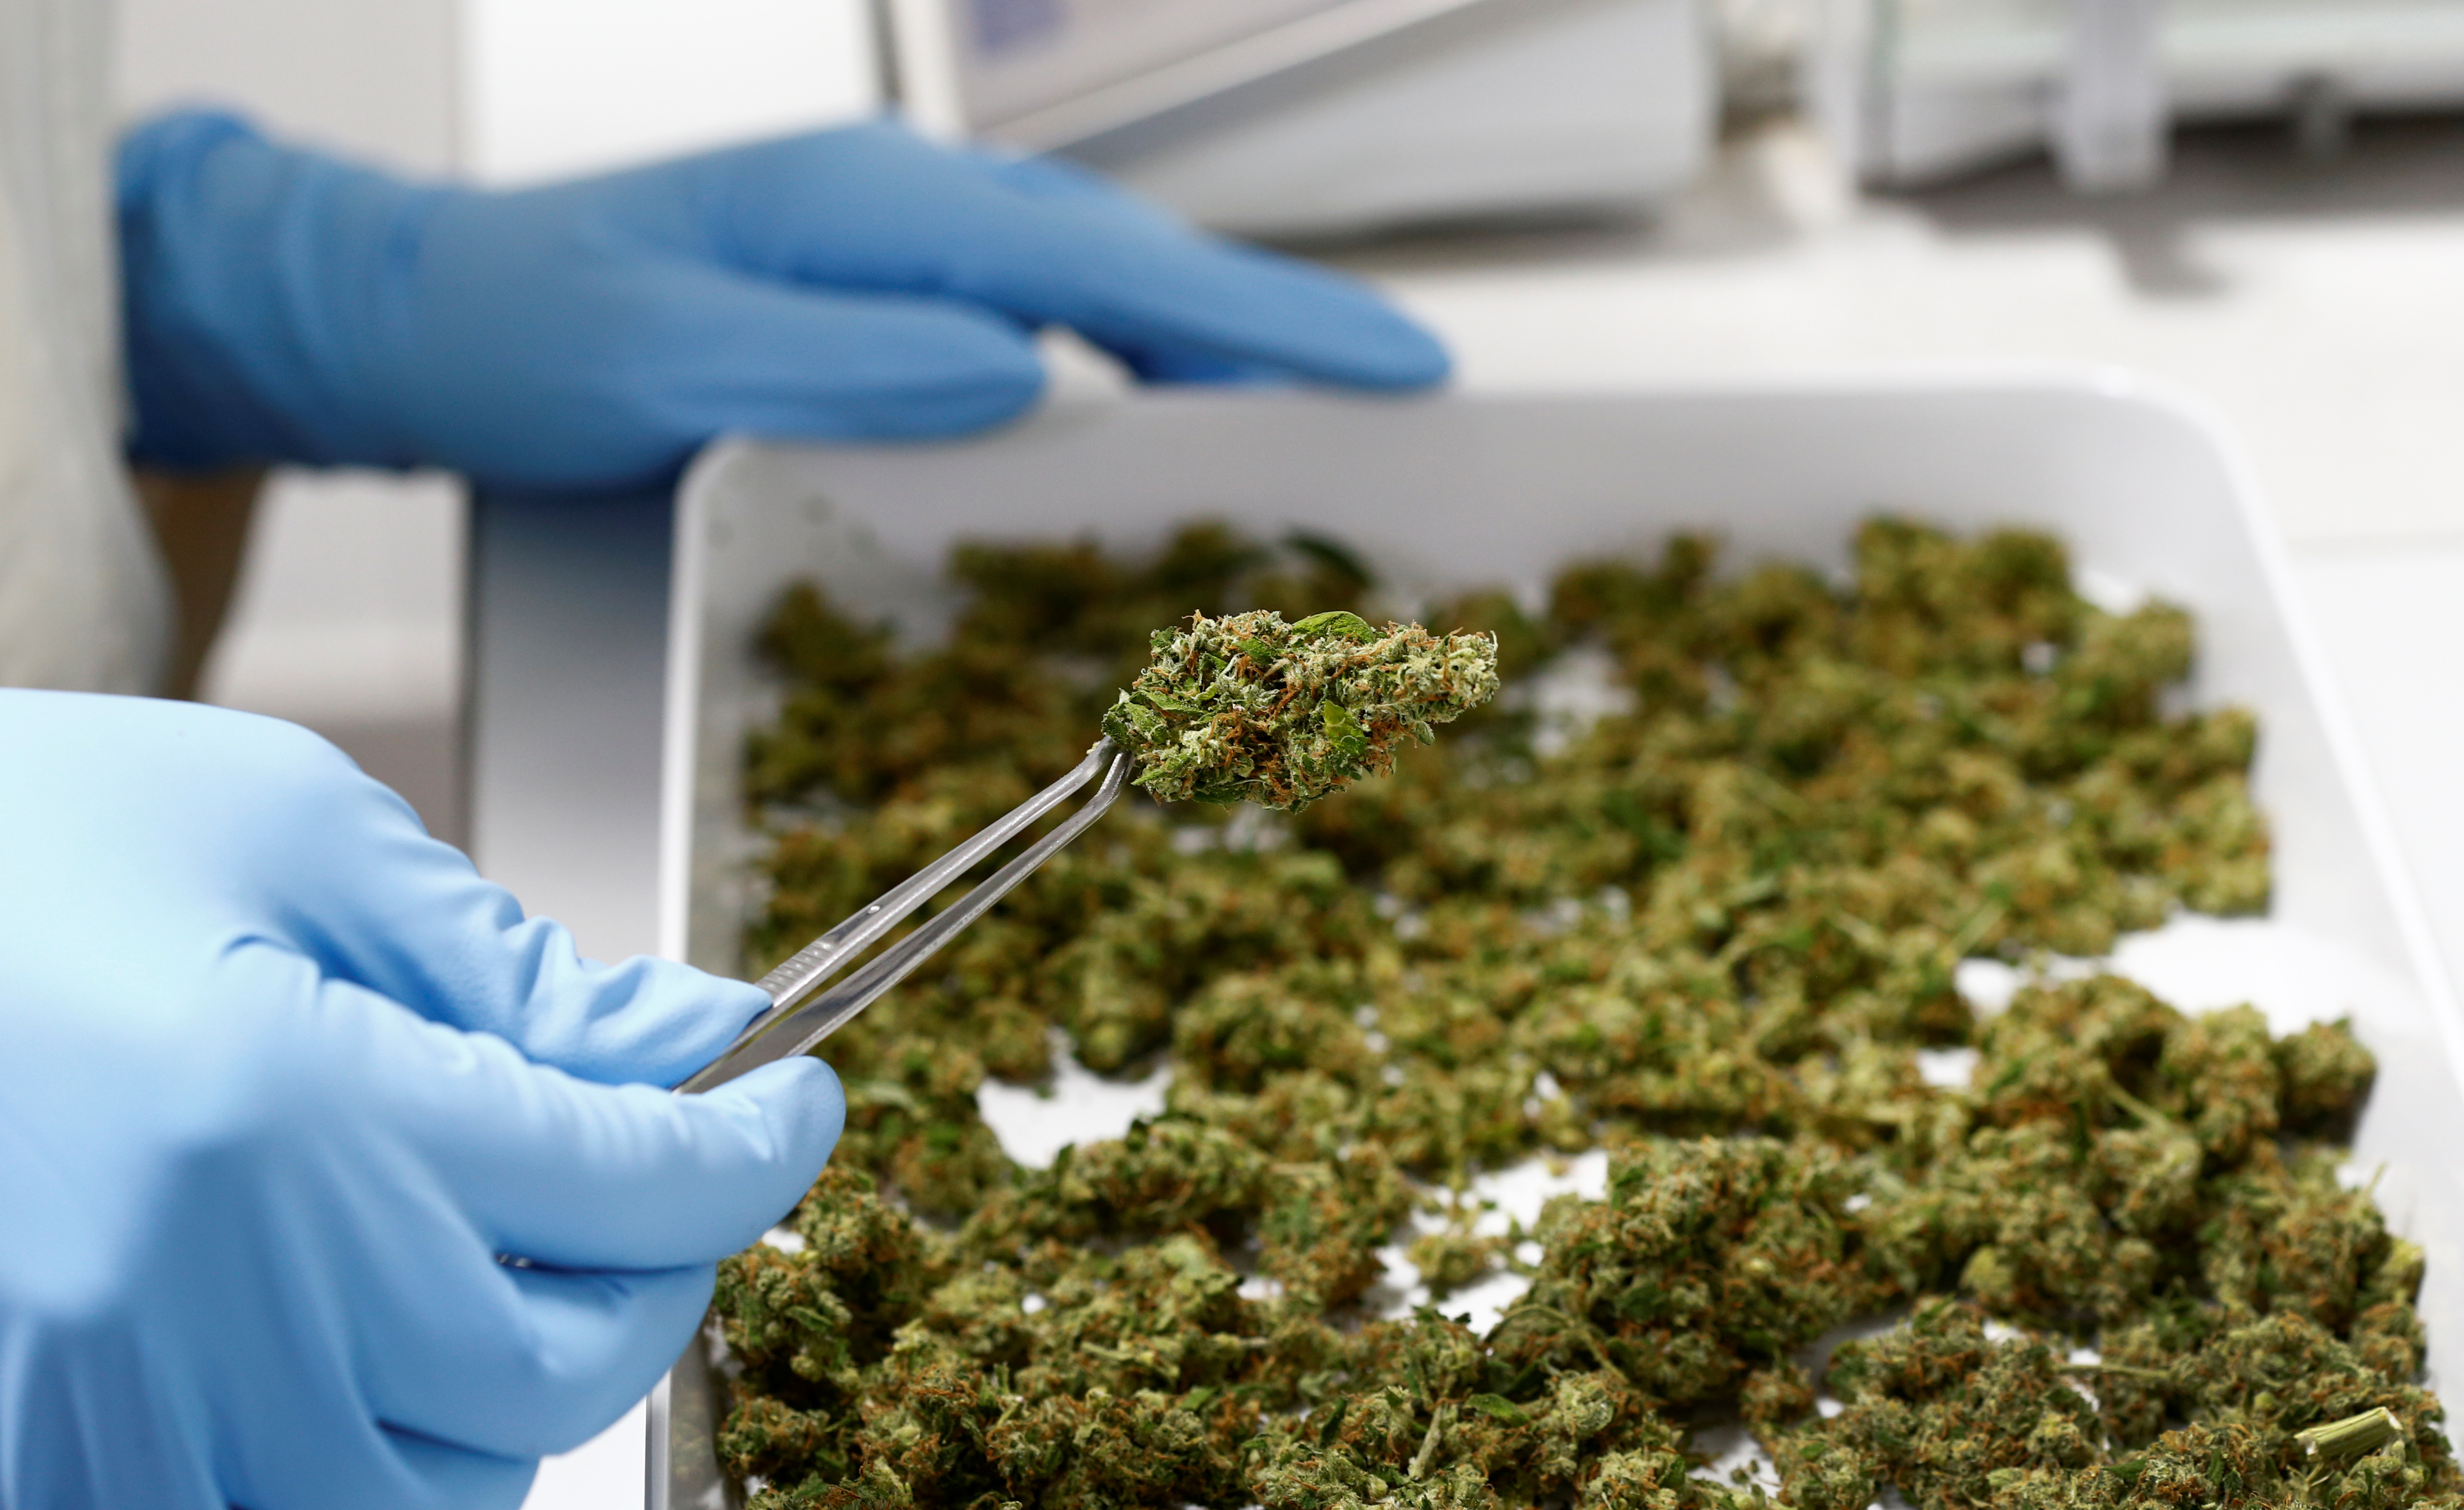 An employee holds up cannabis in the laboratory at the headquarters of herbal medicines manufacturer Bionorica in Neumarkt